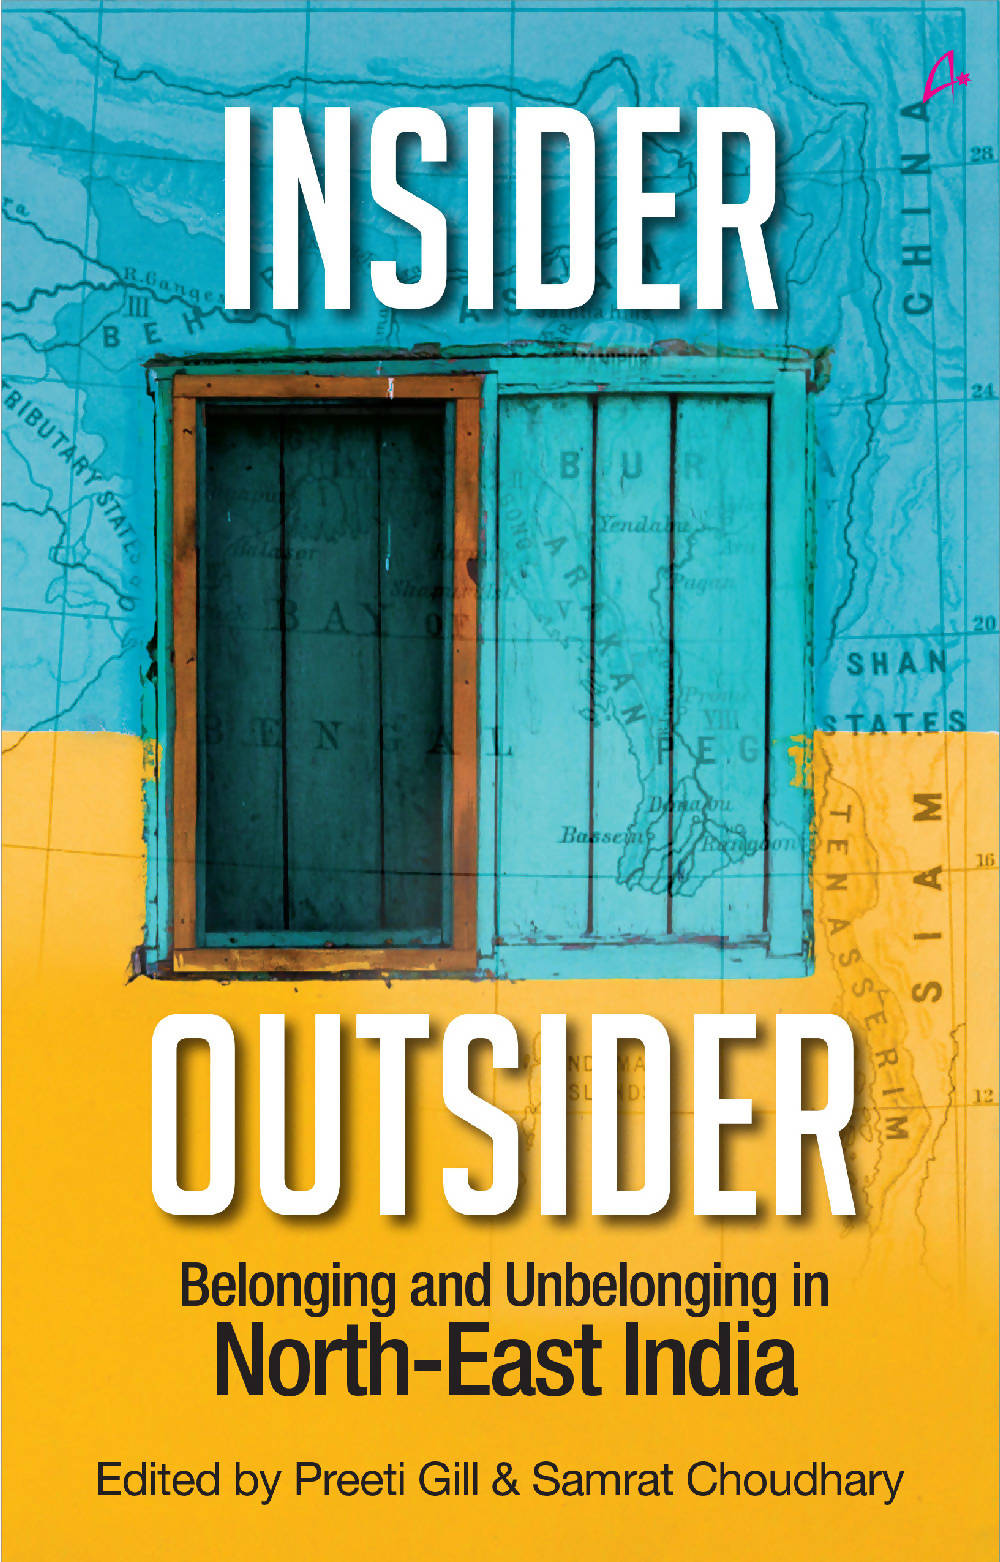 Insider Outsider: Belonging and Unbelonging in North-East India